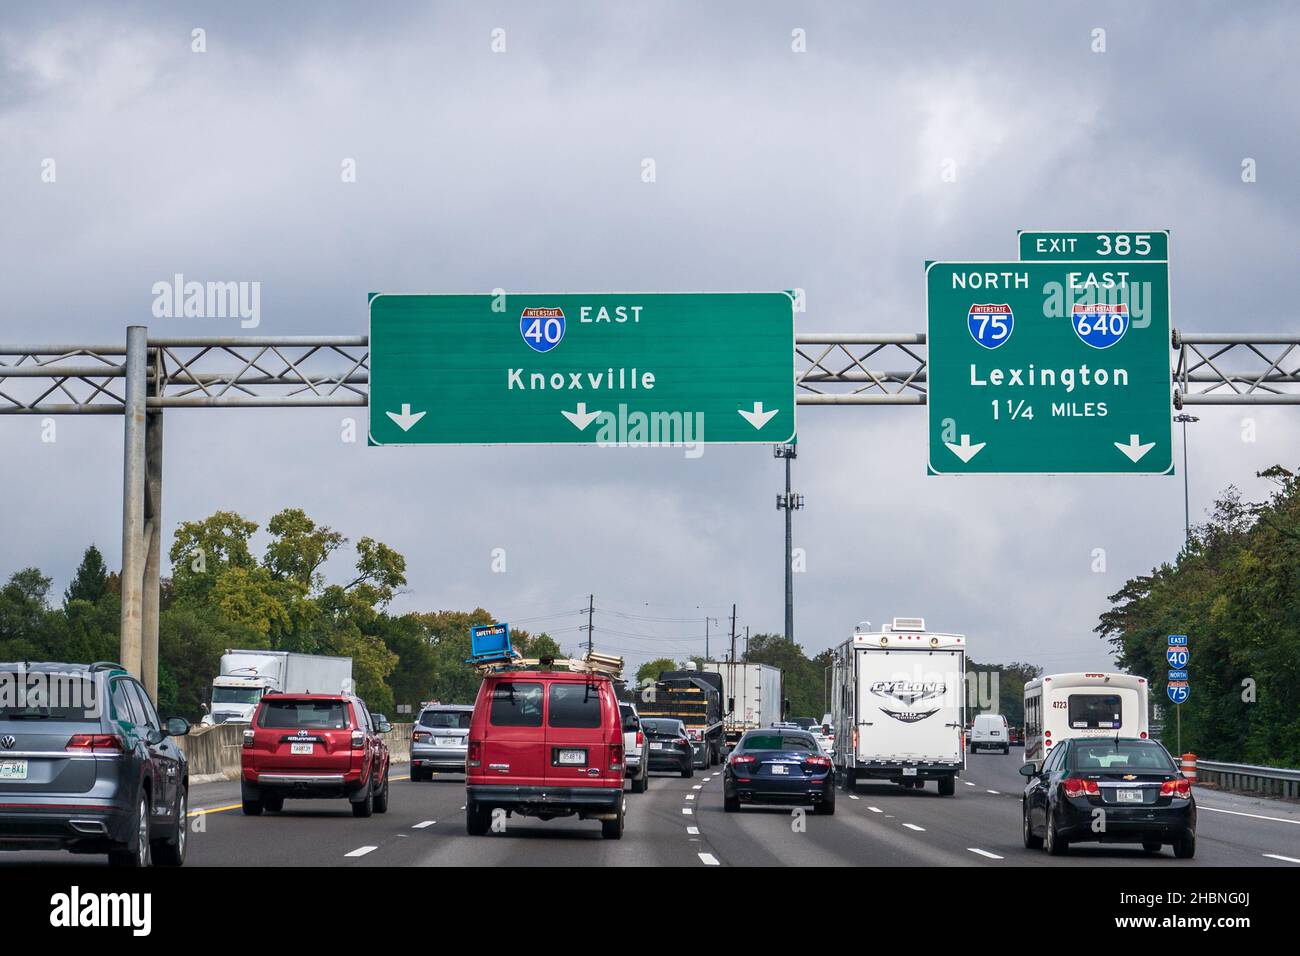 Knoxville, TN - Oct. 25, 2021: Signs on Interstate 40 toward Knoxville and Exit 385 for I-75 North and I-640 East toward Lexington, Kentucky. Stock Photo